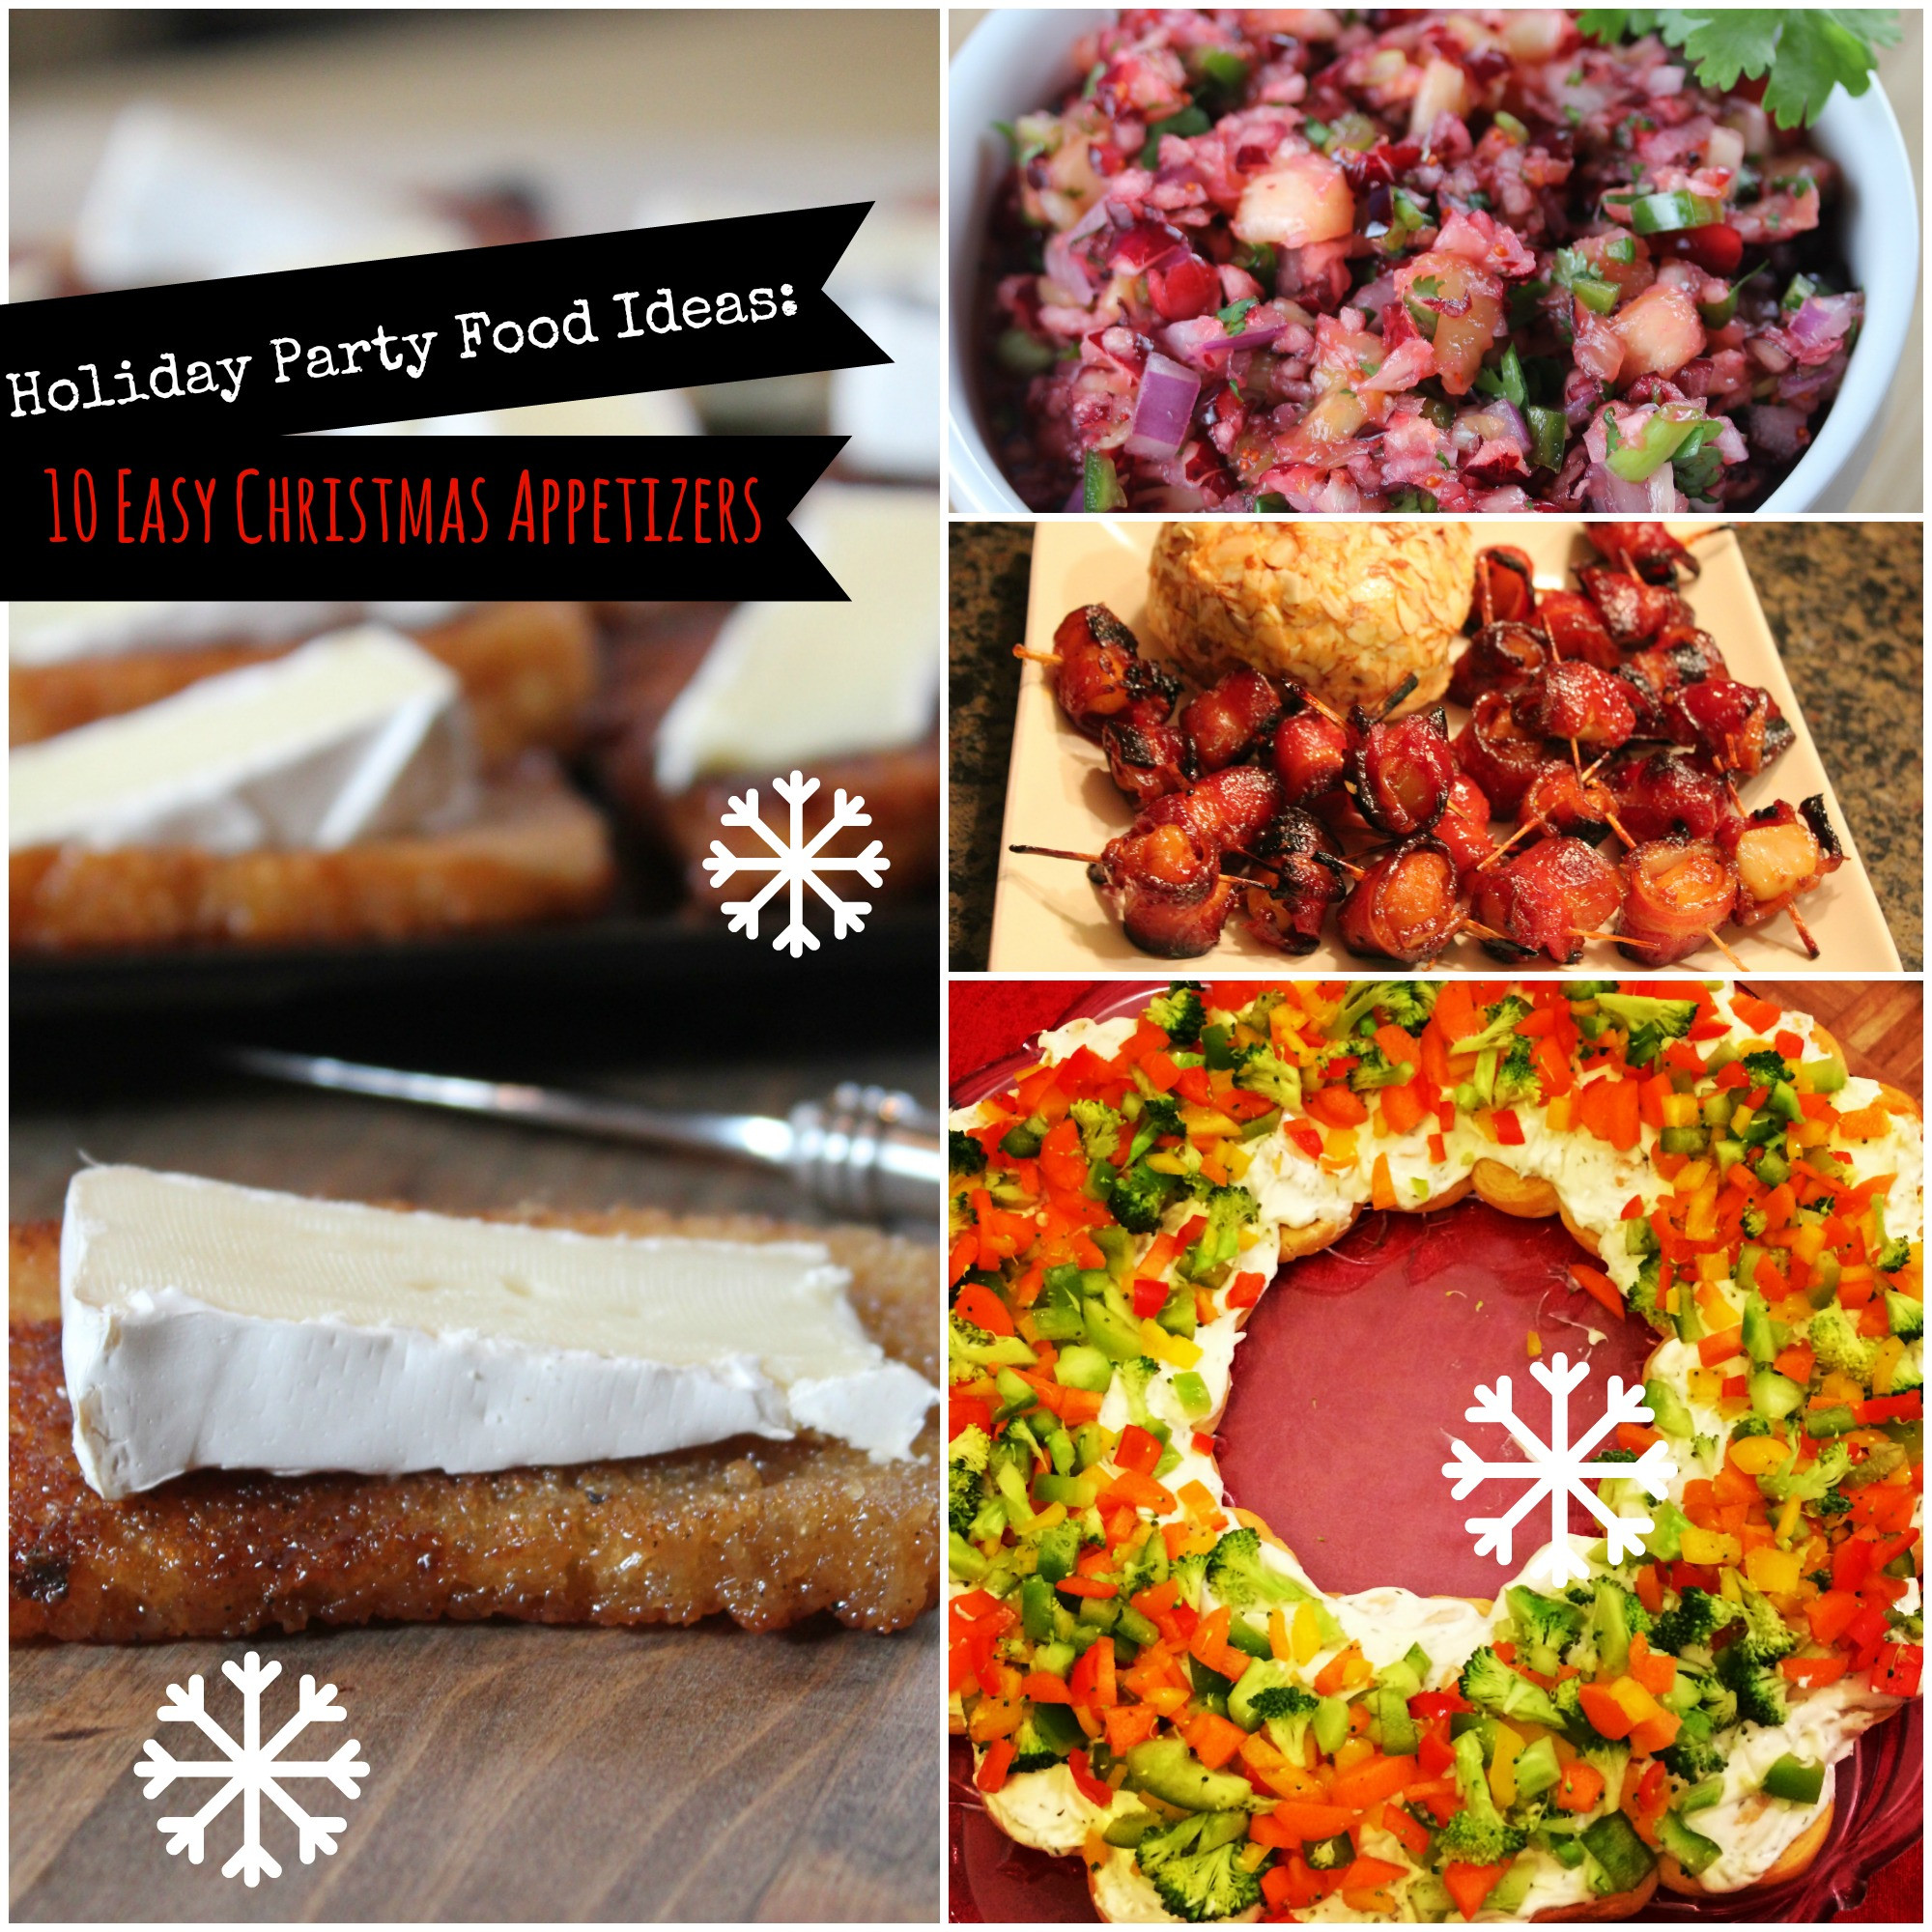 Christmas Holiday Party Food Ideas
 Holiday Party Food Ideas 10 Easy Christmas Appetizers